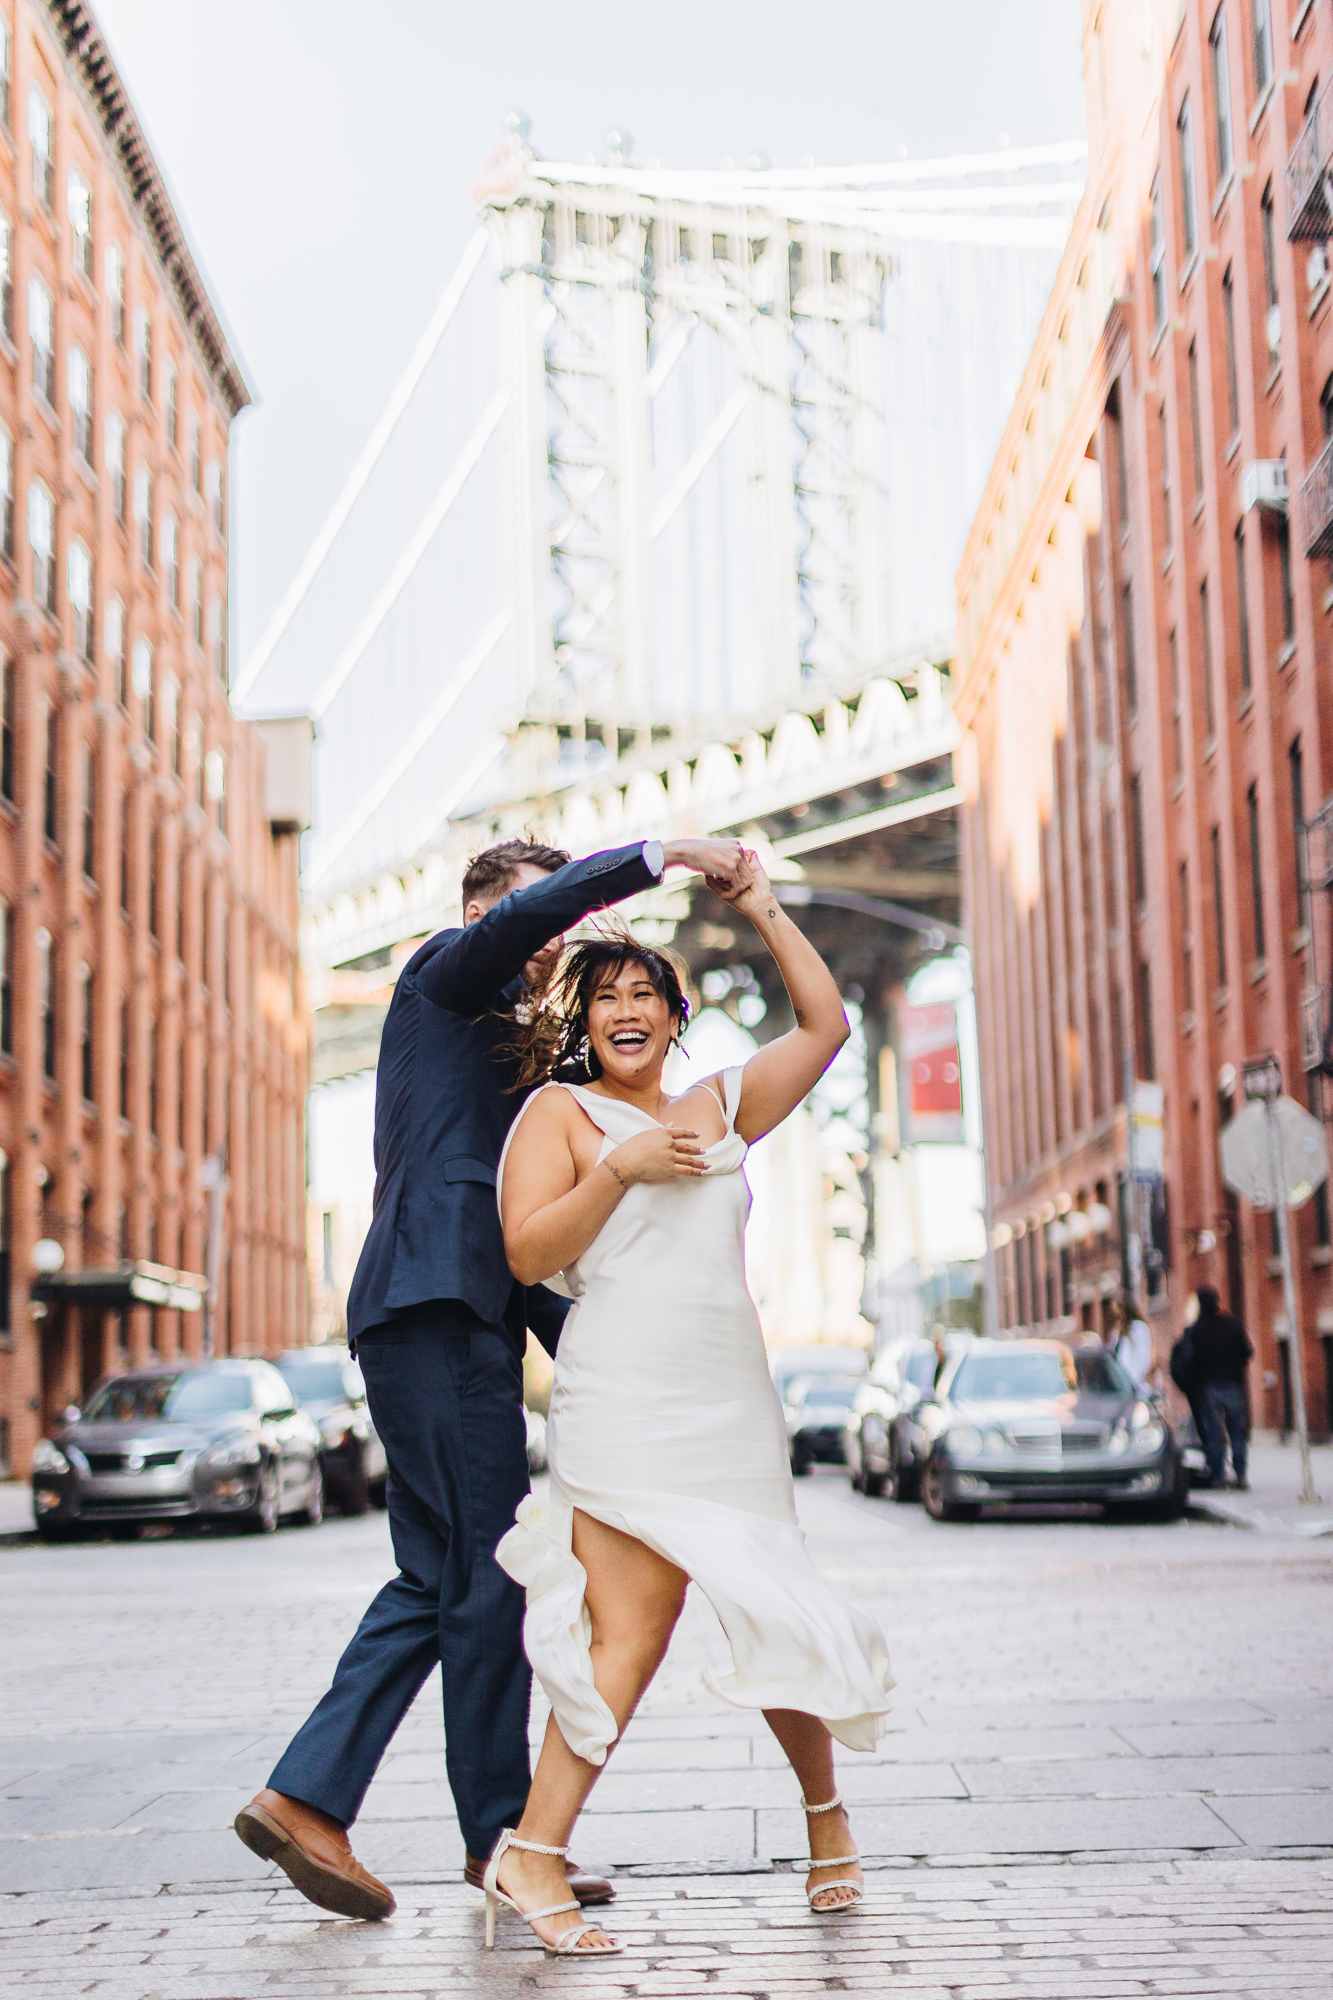 Timeless Fall DUMBO Elopement with NYC views and foliage